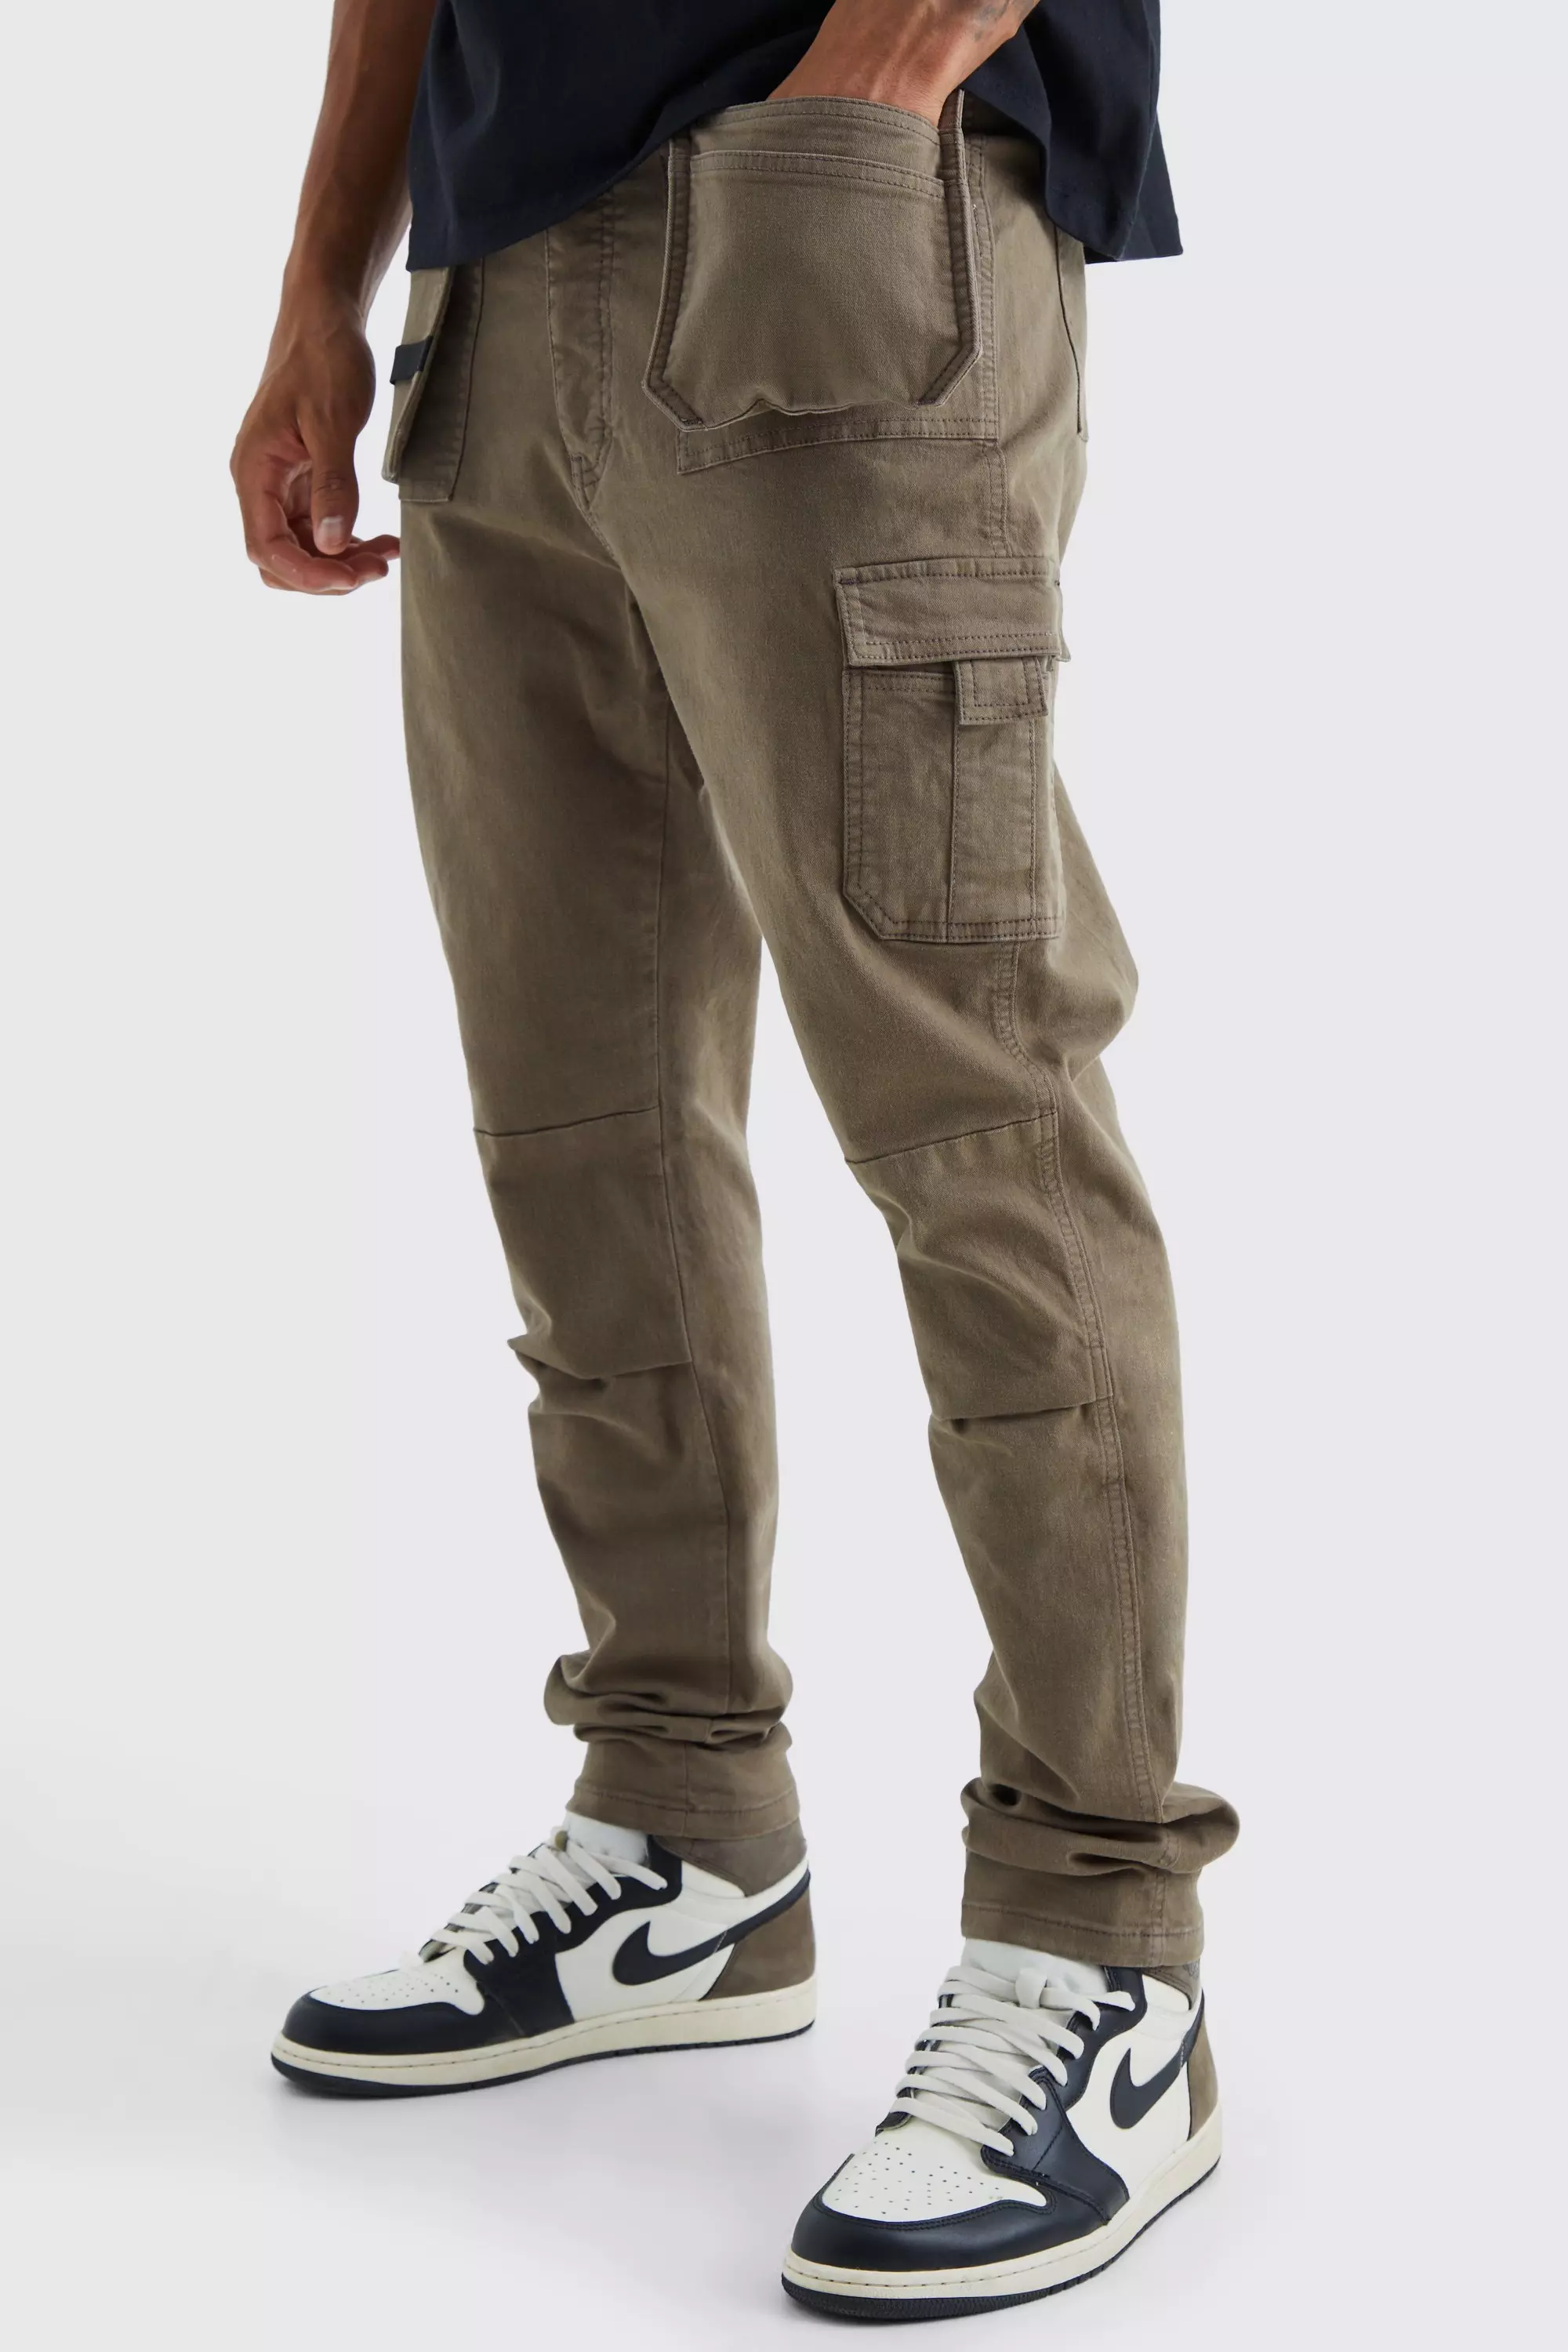 Tall Slim Fit Cargo Pants  Cargo trousers, Slim fit cargo pants